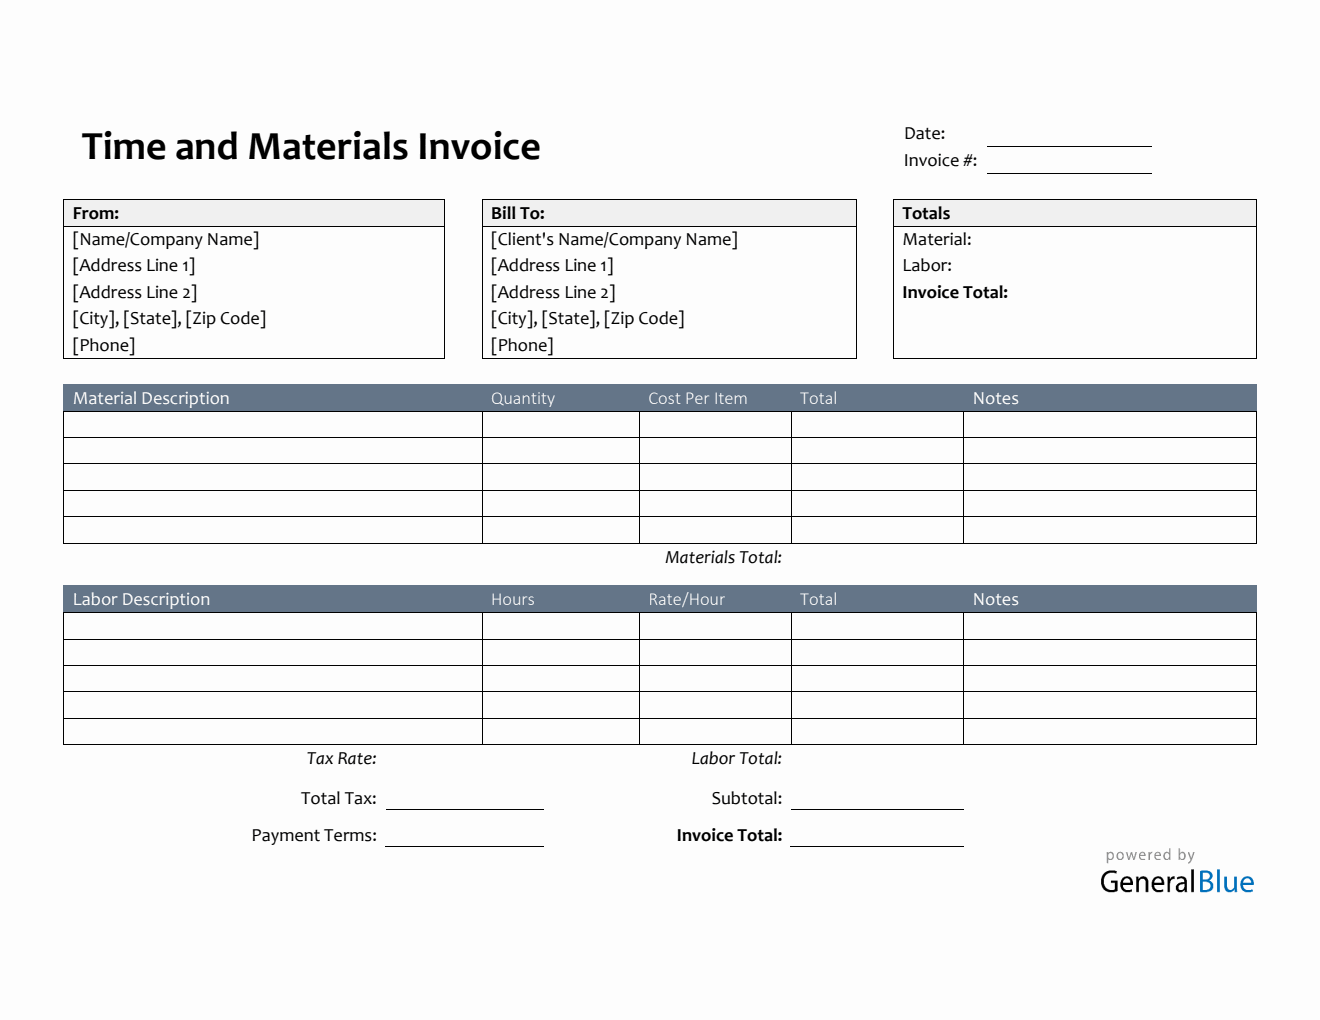 Printable Time and Materials Invoice in Word (Colorful)